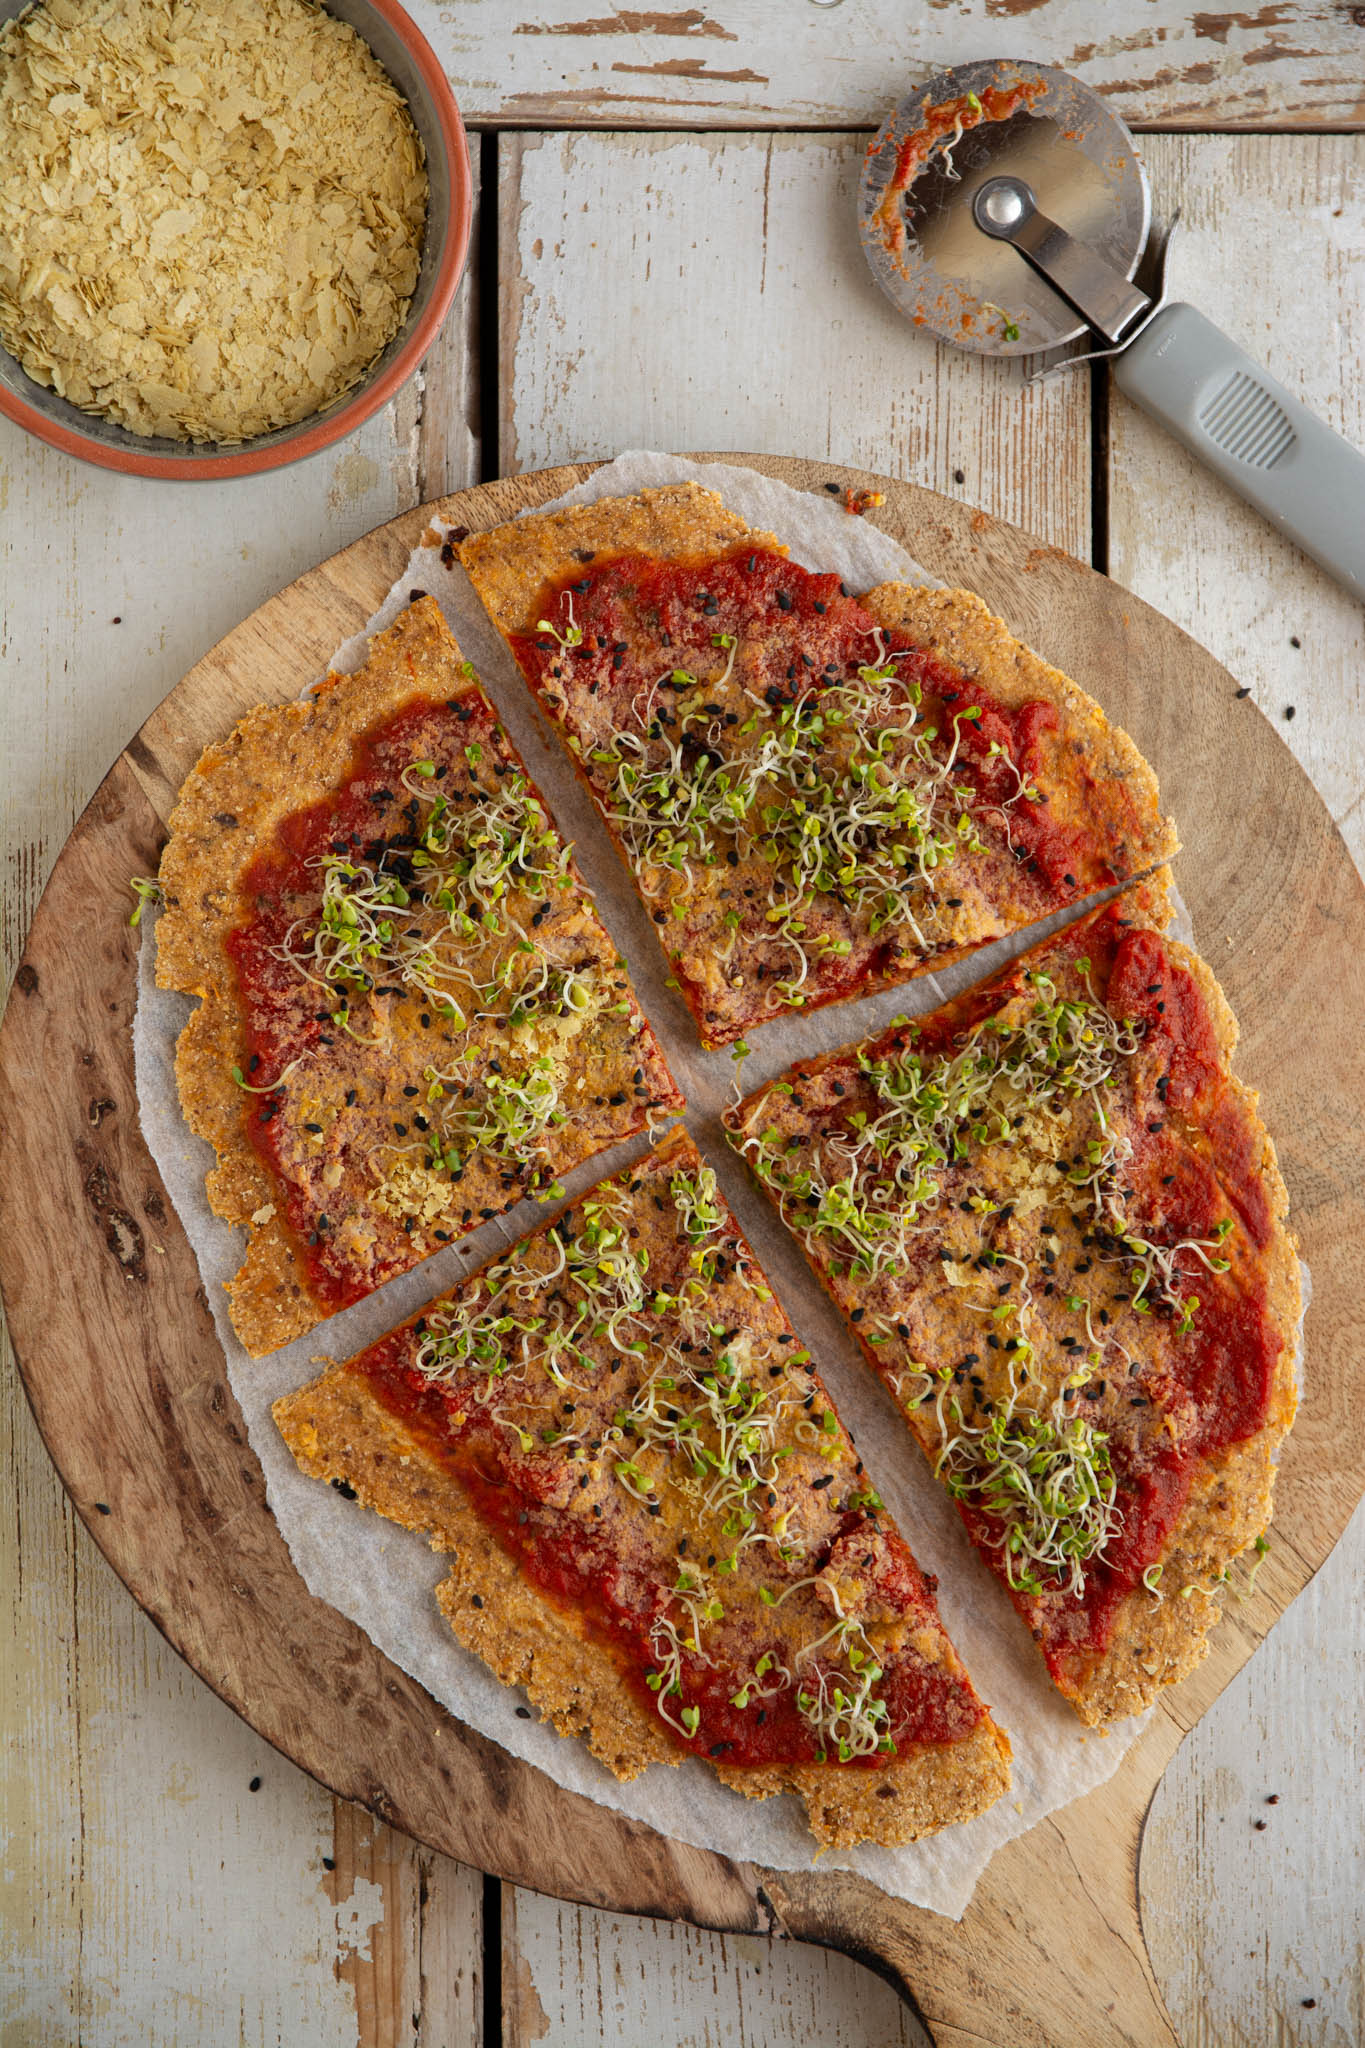 Healthy and delicious sweet potato pizza crust with wholesome ingredients.